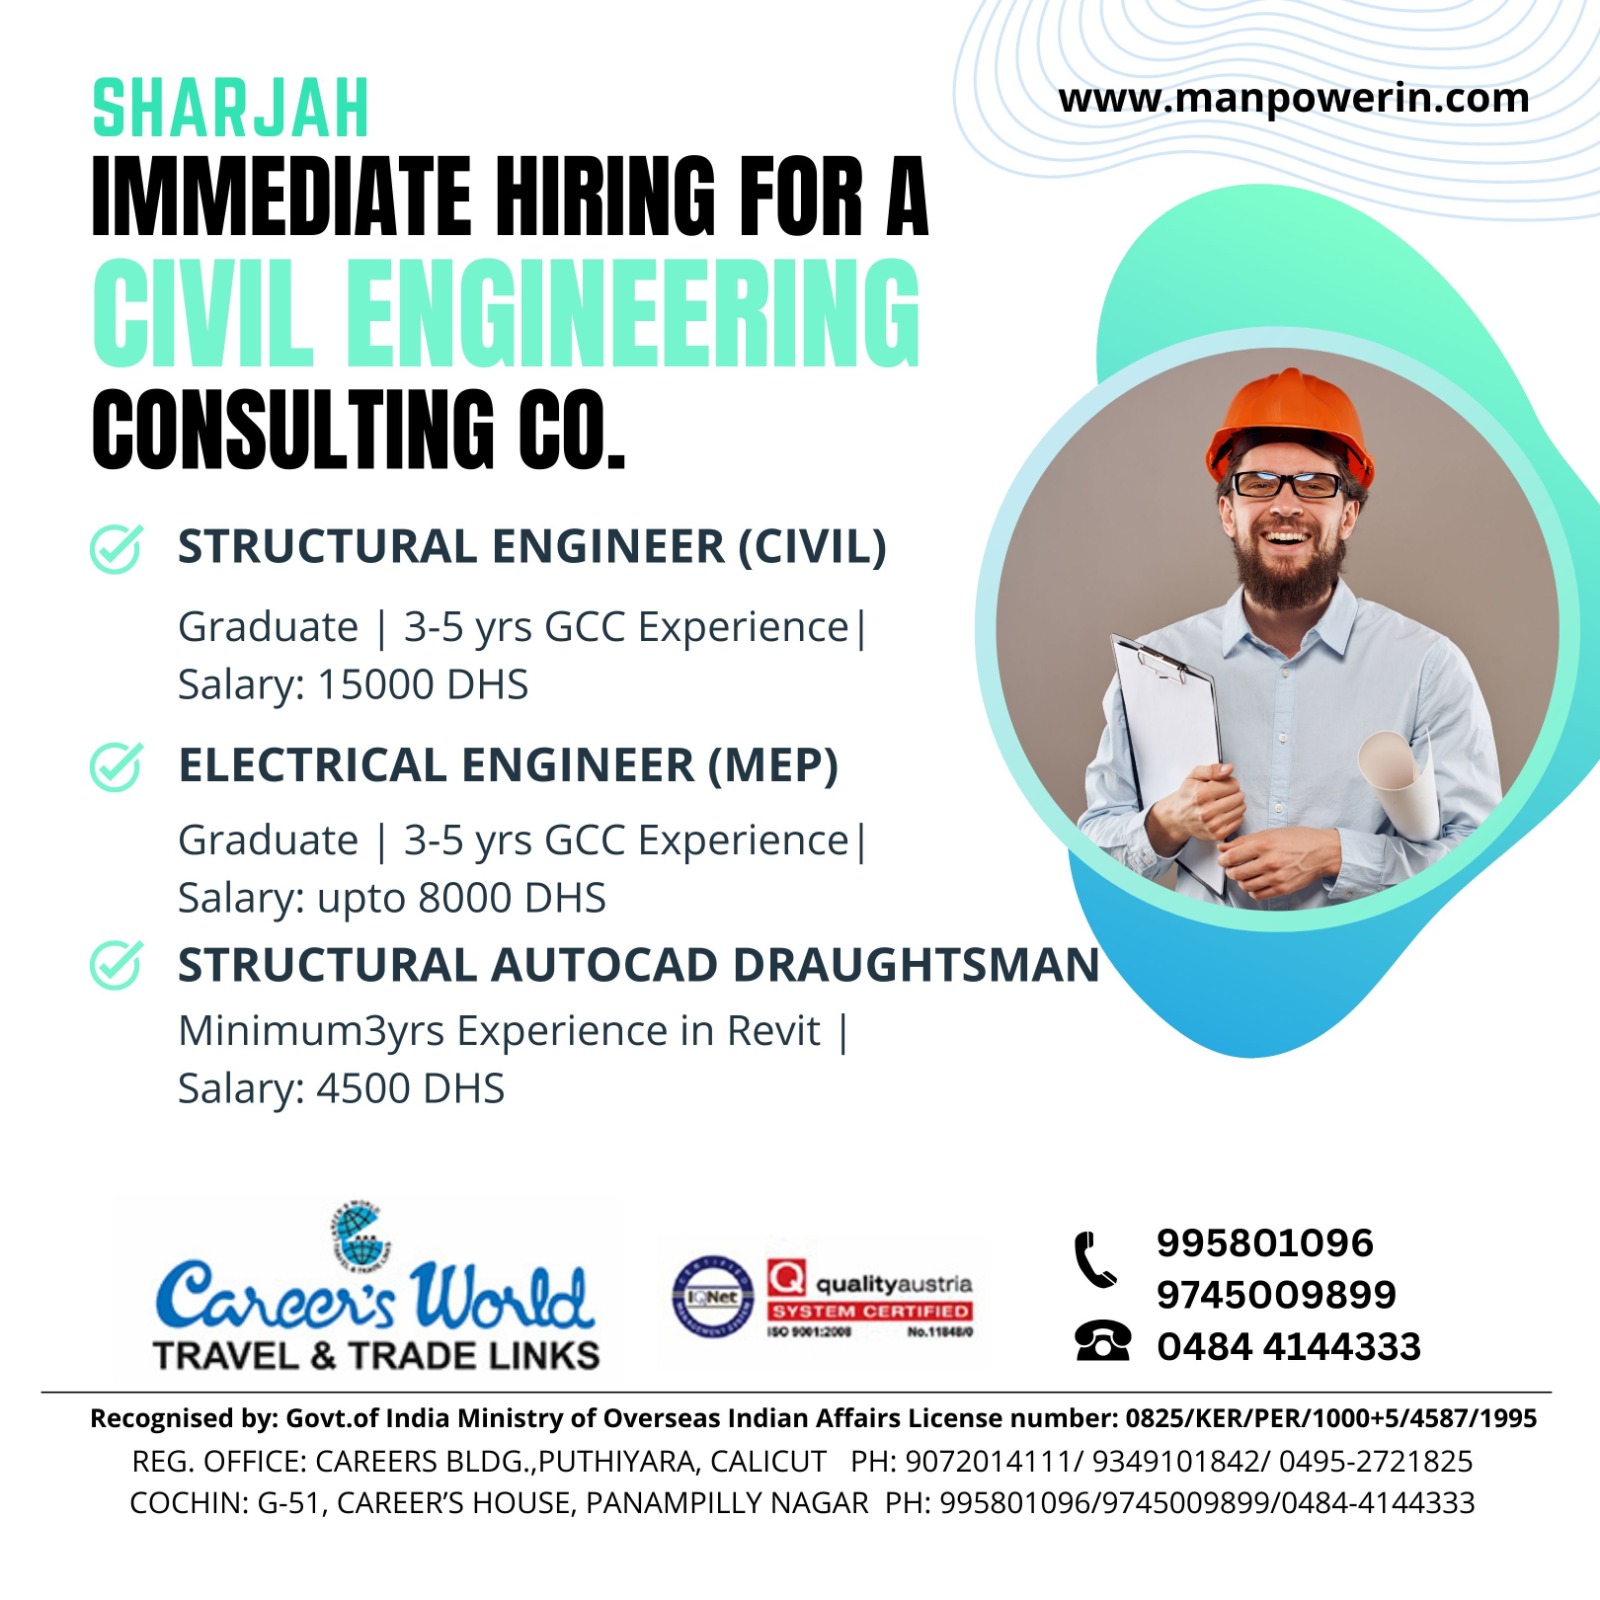 Civil Engineering Consulting Company